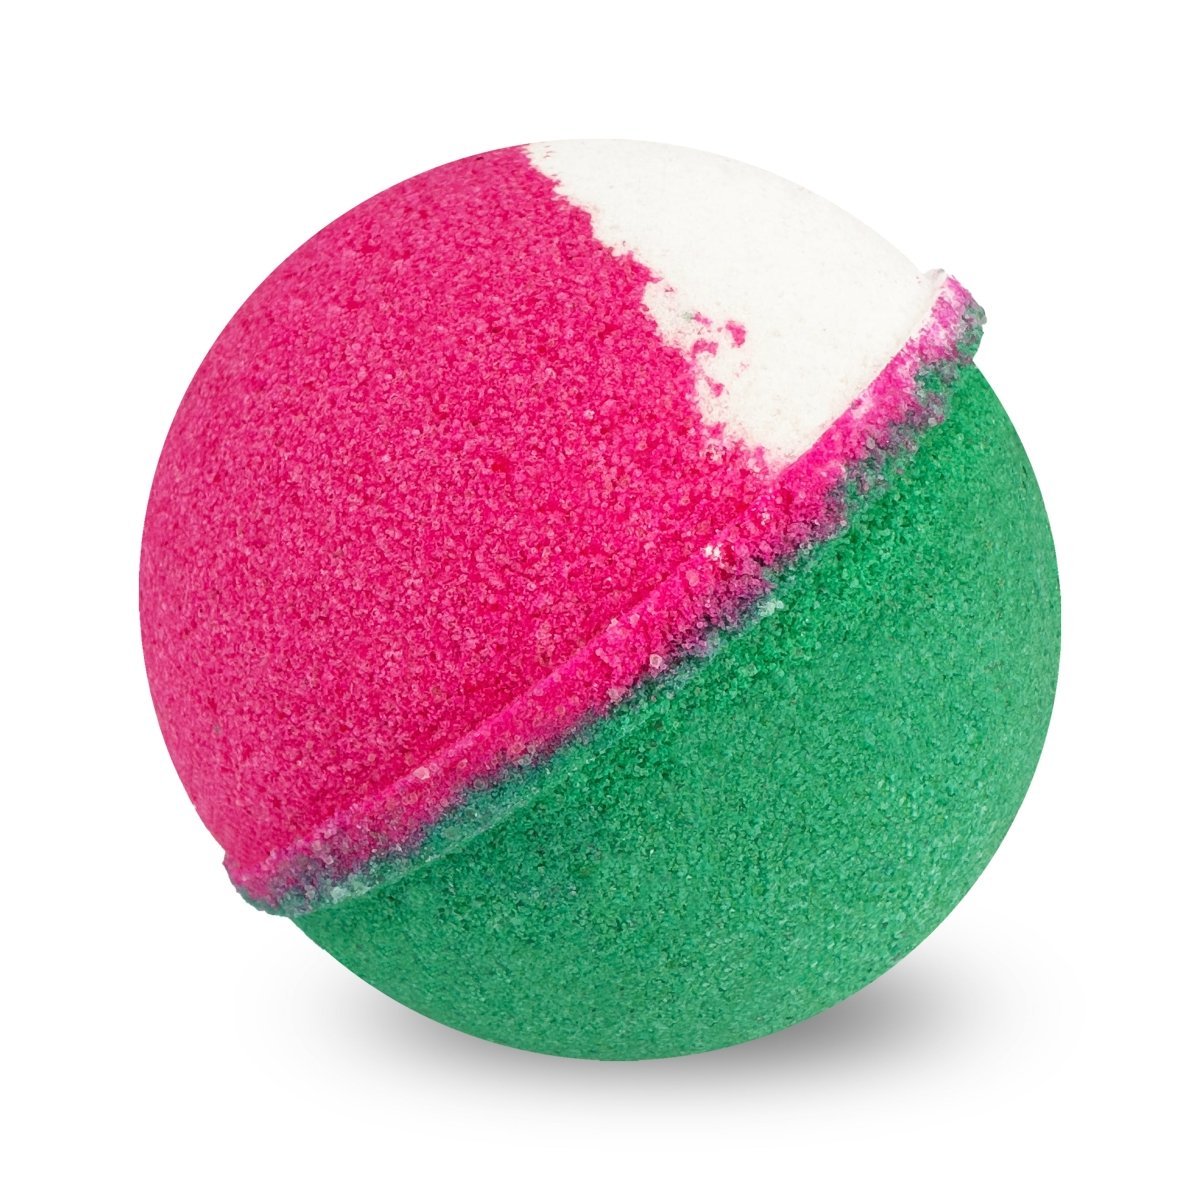 Seedling Bath Bomb for Kids & Adults - Large Colourful Glitters & Watermelon Fragrance - Made in Australia by Bath Box